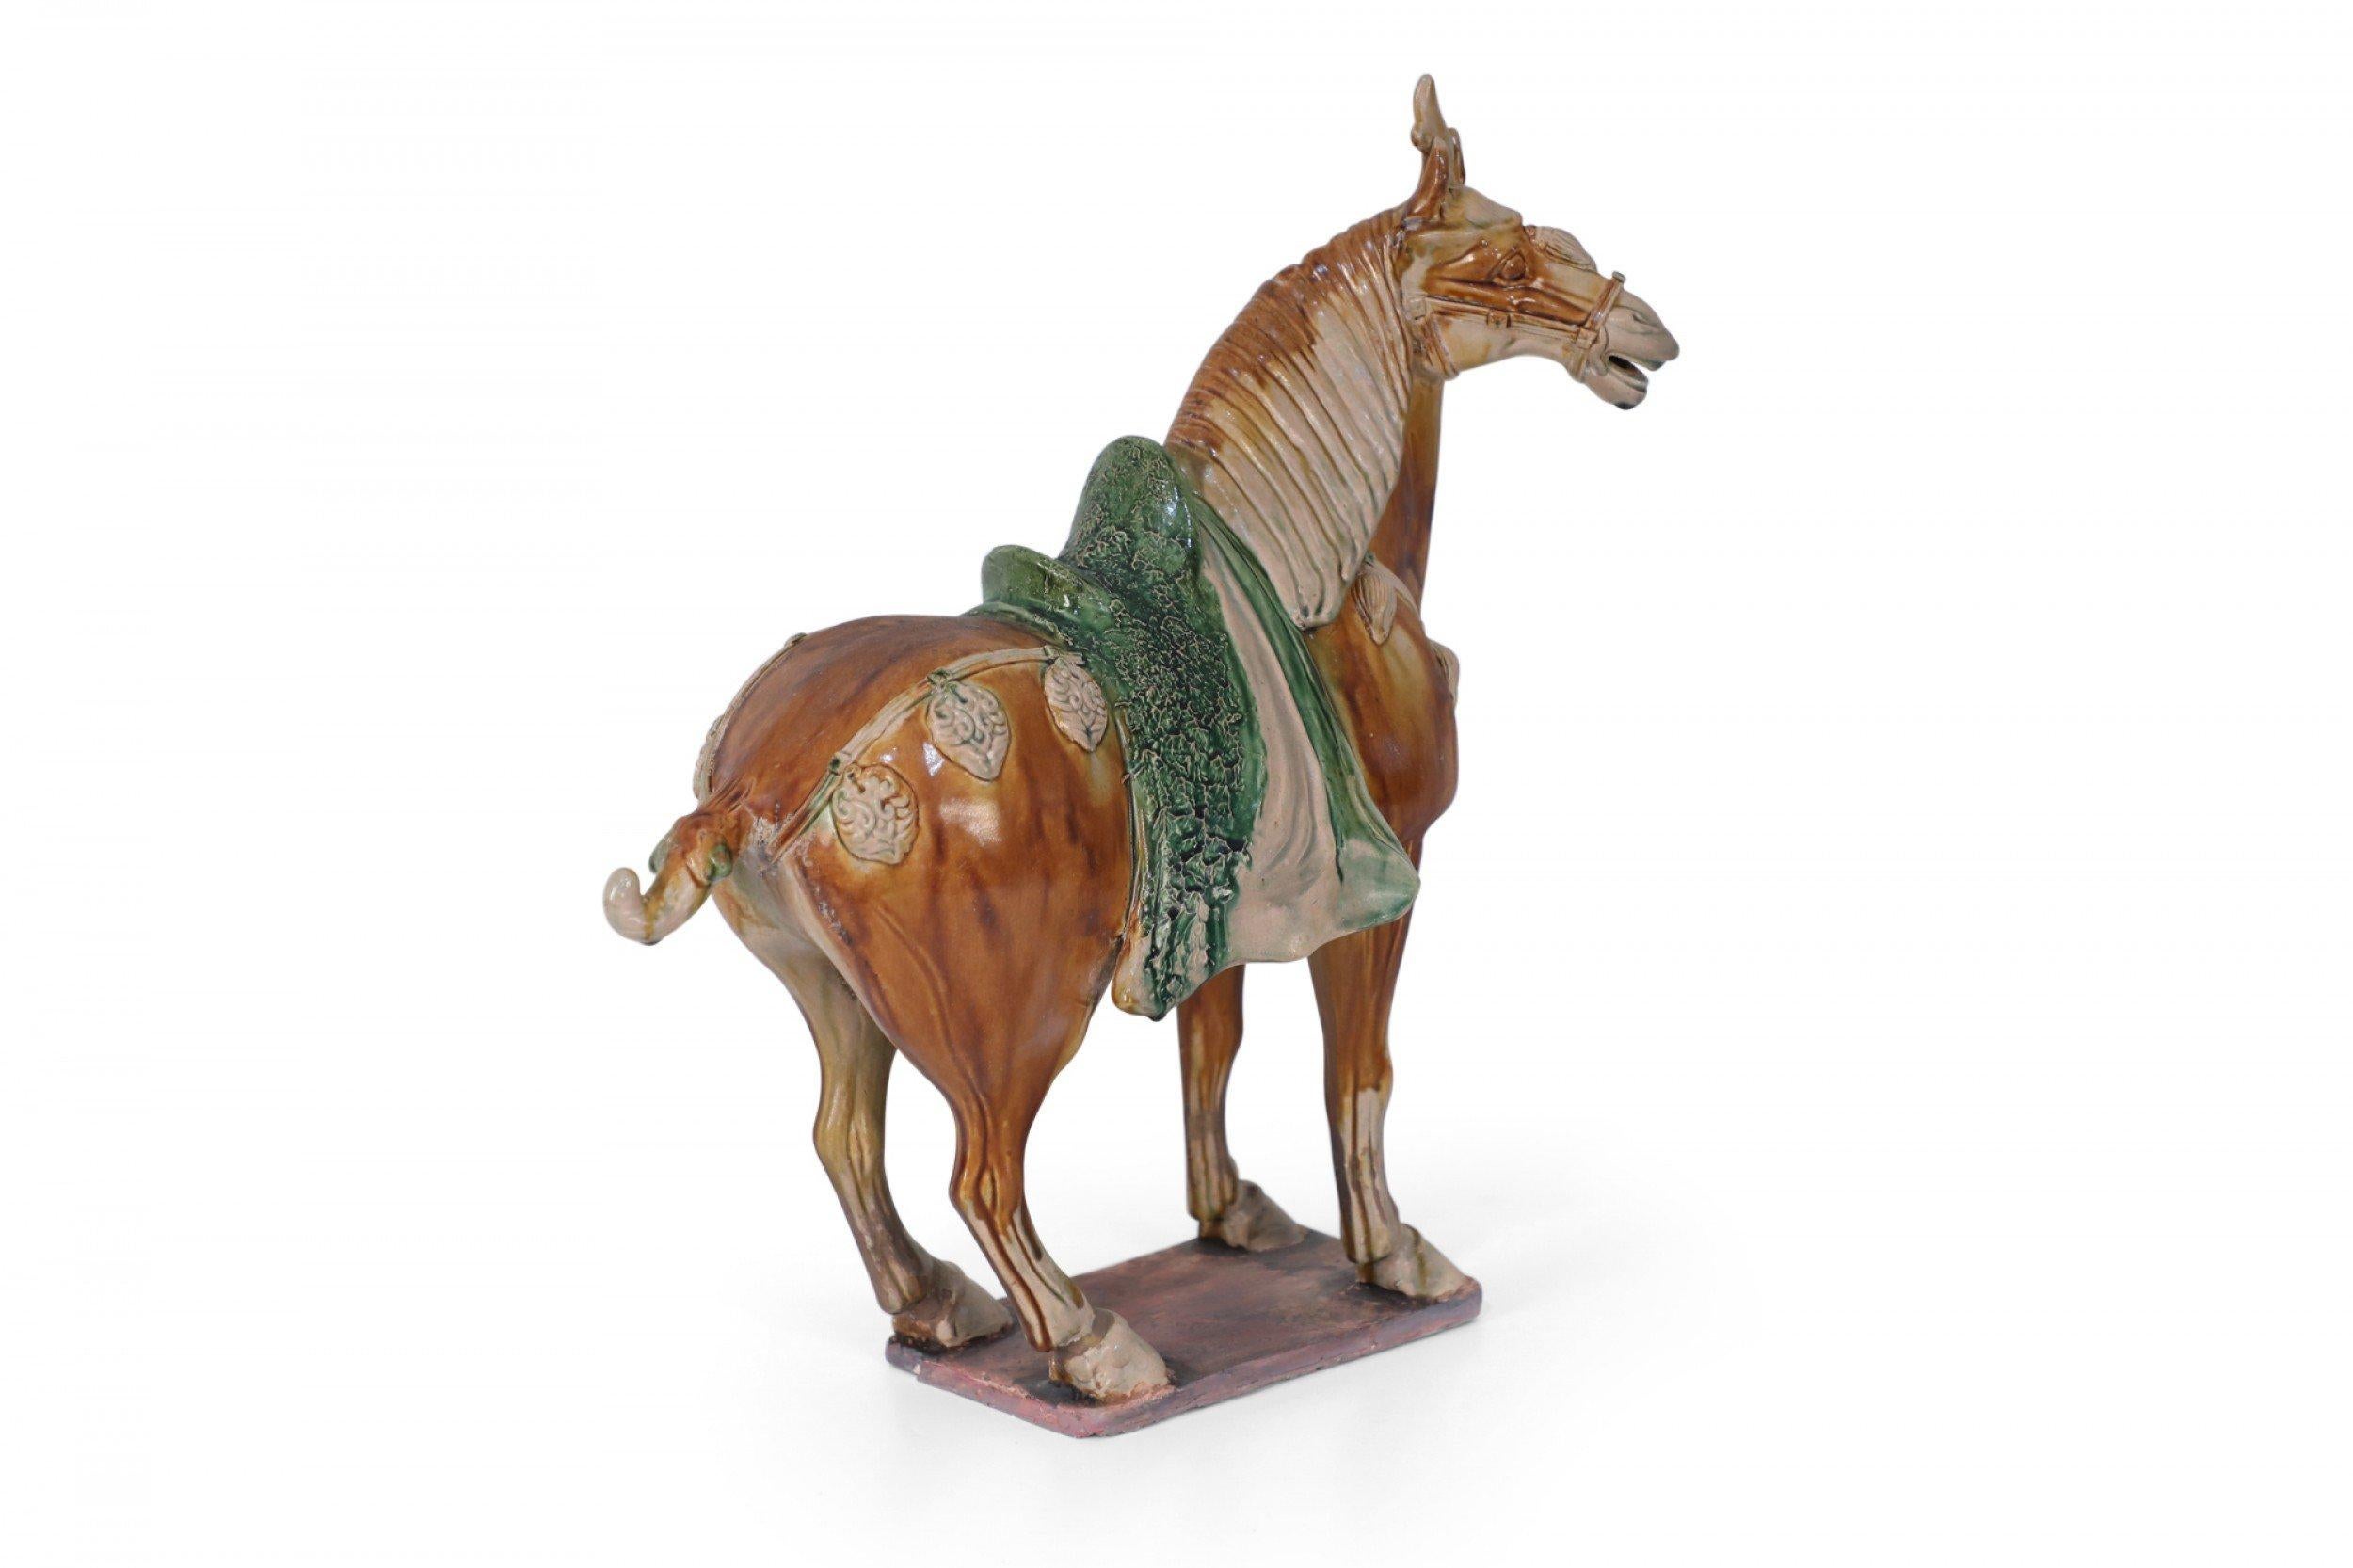 Antique Chinese Tang Dynasty-style terra cotta figure of a horse commonly used as a tomb figure for wealthy burials in the 7-8th centuries, and crafted with traditional tri-color glaze, or Sancai, utilizing brown, green and off-white.
 